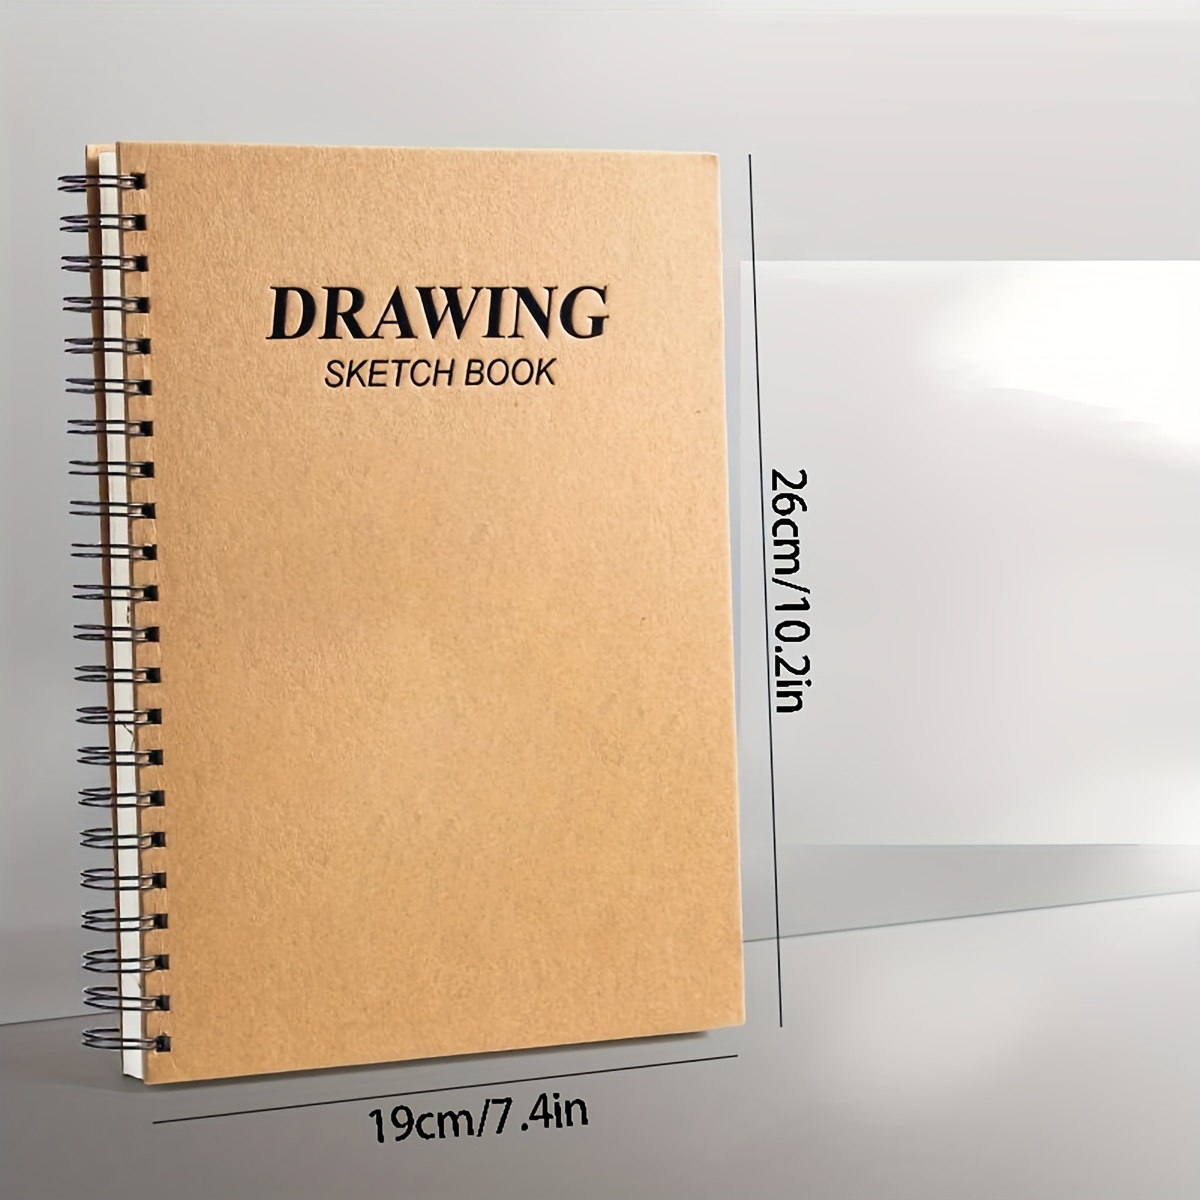 1pc A4 Sketchbook For Drawing & Sketching, Art Student's